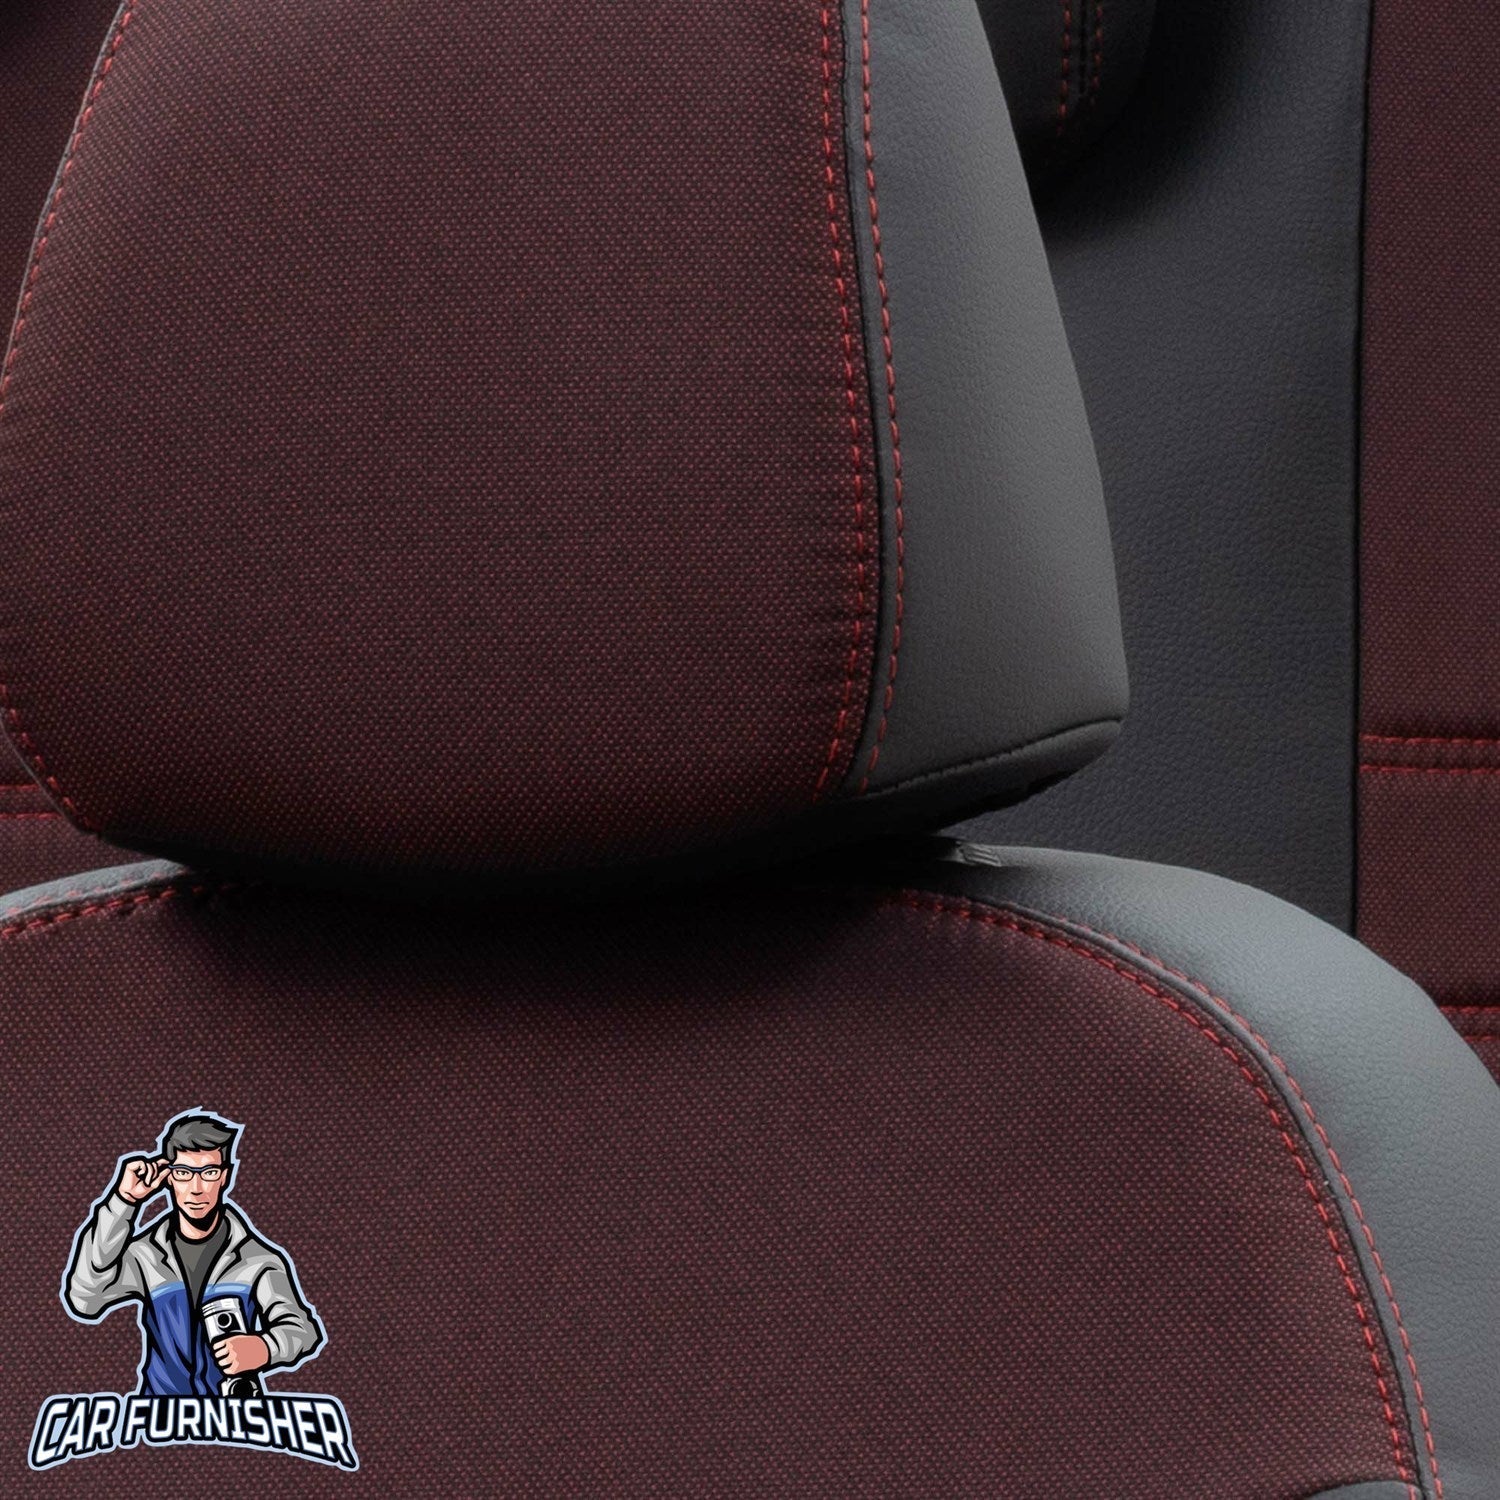 Chevrolet Cruze Seat Covers Paris Leather & Jacquard Design Red Leather & Jacquard Fabric